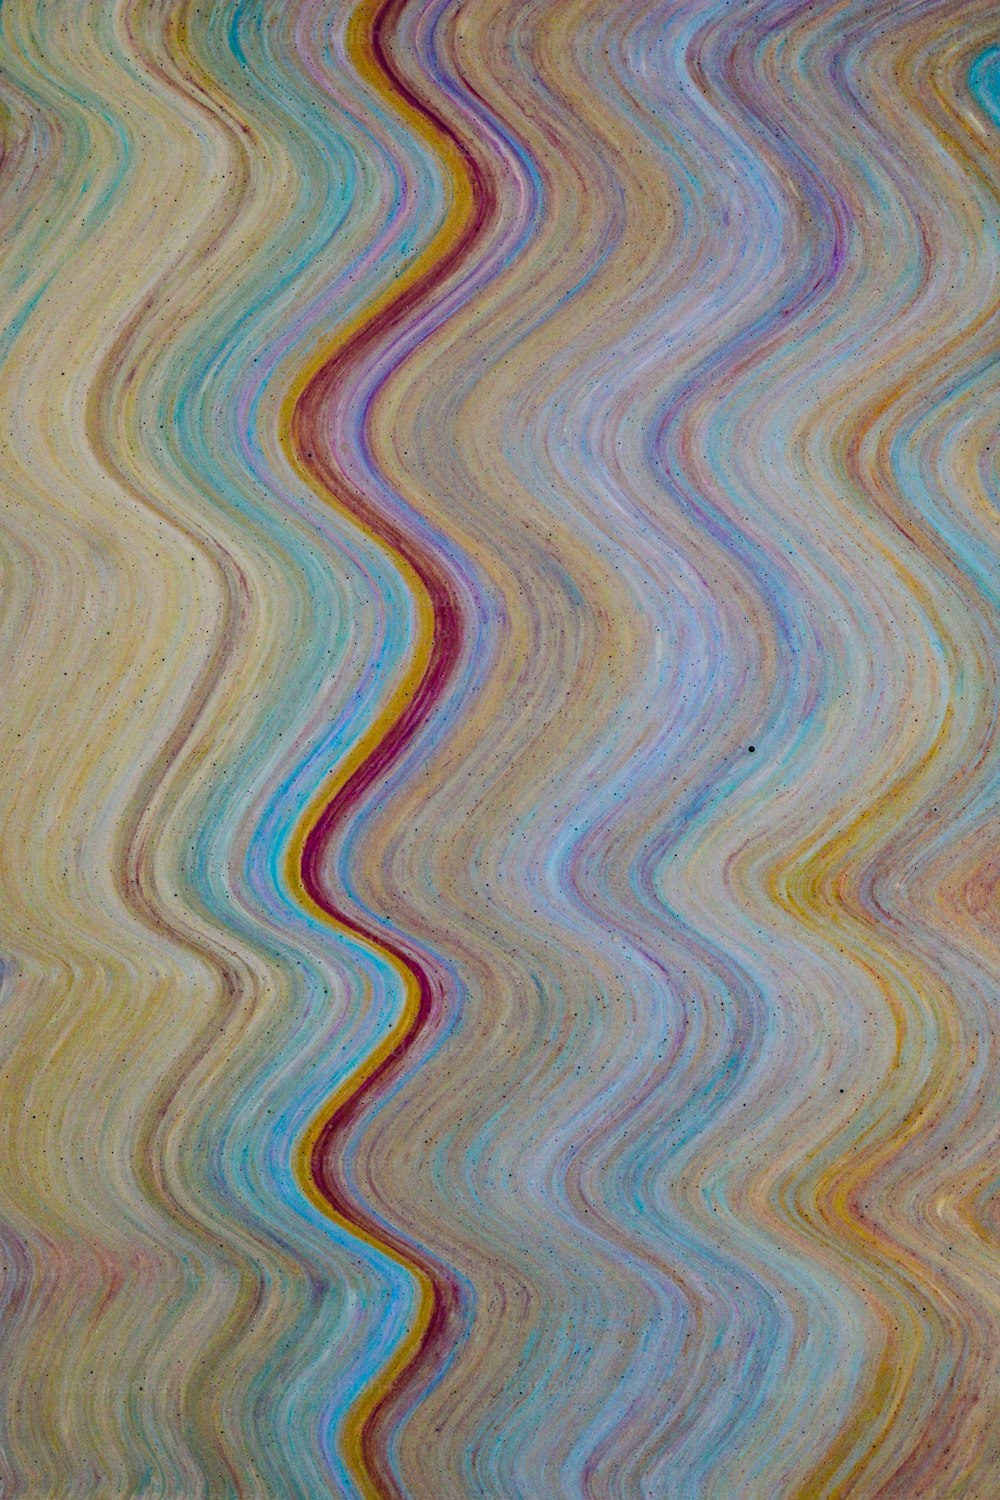 a multicolored wave pattern is shown in this image